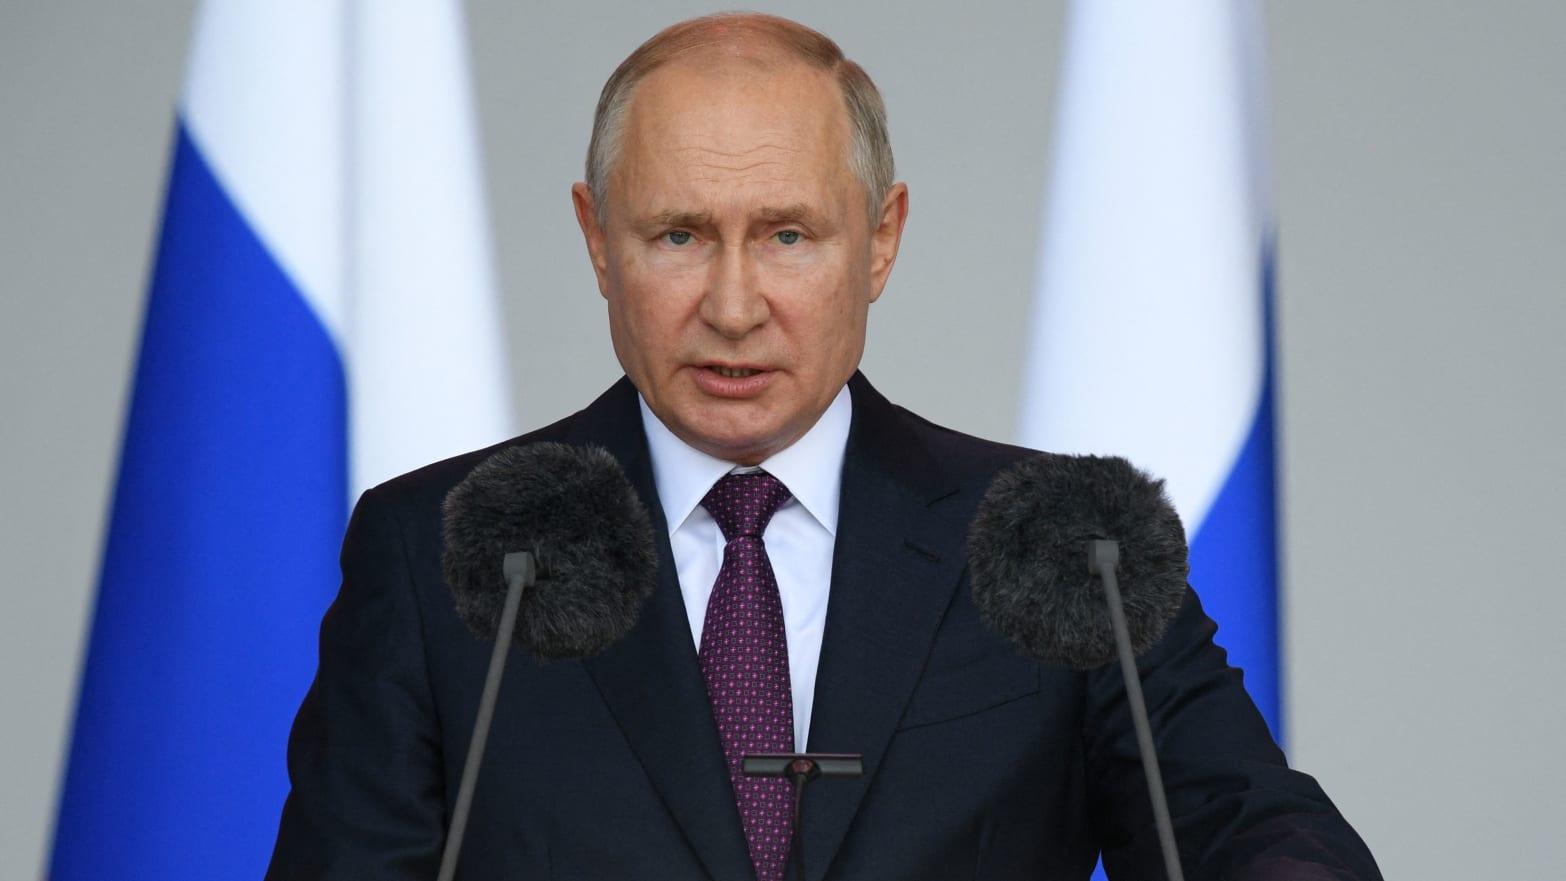 Putin: Western countries are striving to hold the countries and peoples in chains of the neocolonial order - Avaz